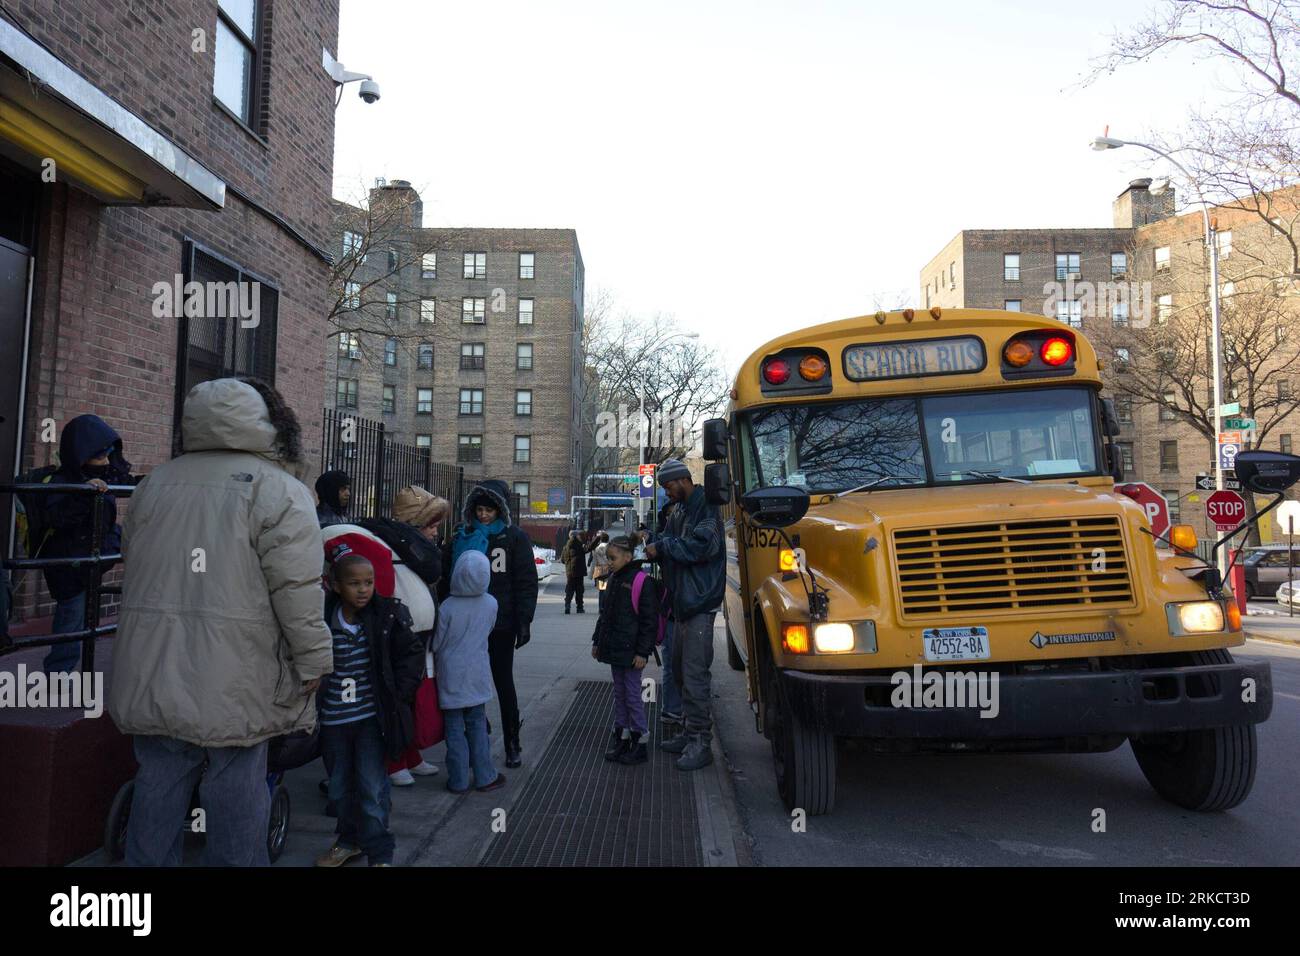 Bildnummer: 54802034  Datum: 10.01.2011  Copyright: imago/Xinhua (110111) -- NEW YORK, Jan. 11, 2011 (Xinhua) -- Resident of the Queensbridge houses pick up their children from a school bus in New York, the United States, Jan. 10, 2011. The New York City Housing Authority (NYCHA), which was established on Feb. 17, 1934, was a pioneering vision that reshaped the city s landscape, replacing slum tenements with clean, safe and affordable housing for poor and working families. Today, NYCHA is New York s largest landlord as well as the nation s largest and foremost provider of public housing. Five Stock Photo